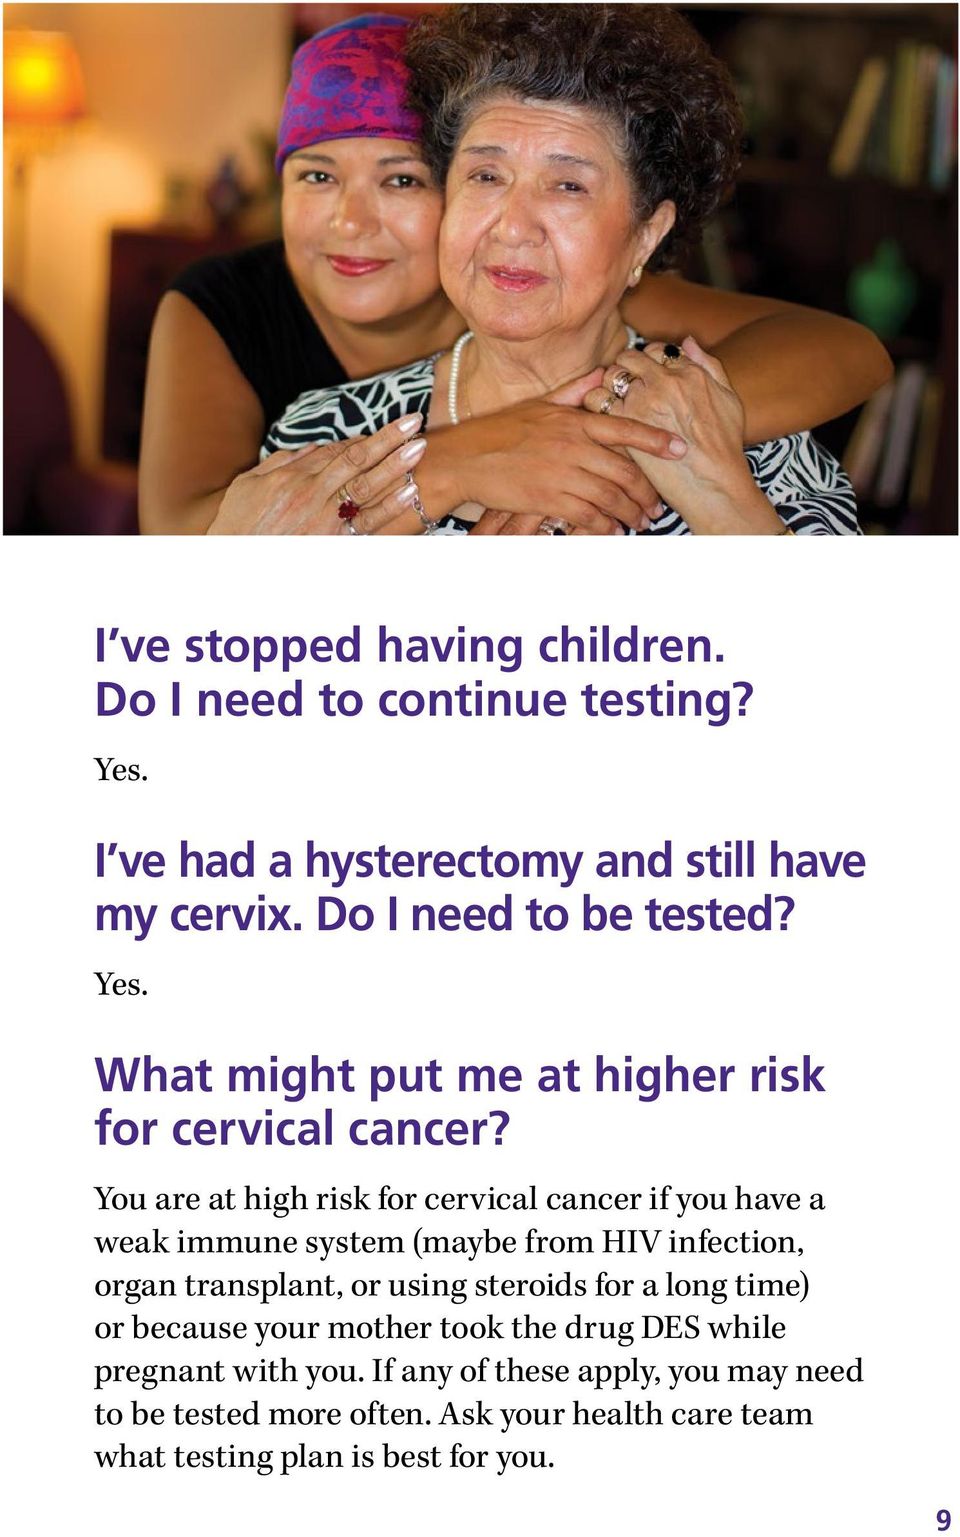 You are at high risk for cervical cancer if you have a weak immune system (maybe from HIV infection, organ transplant, or using